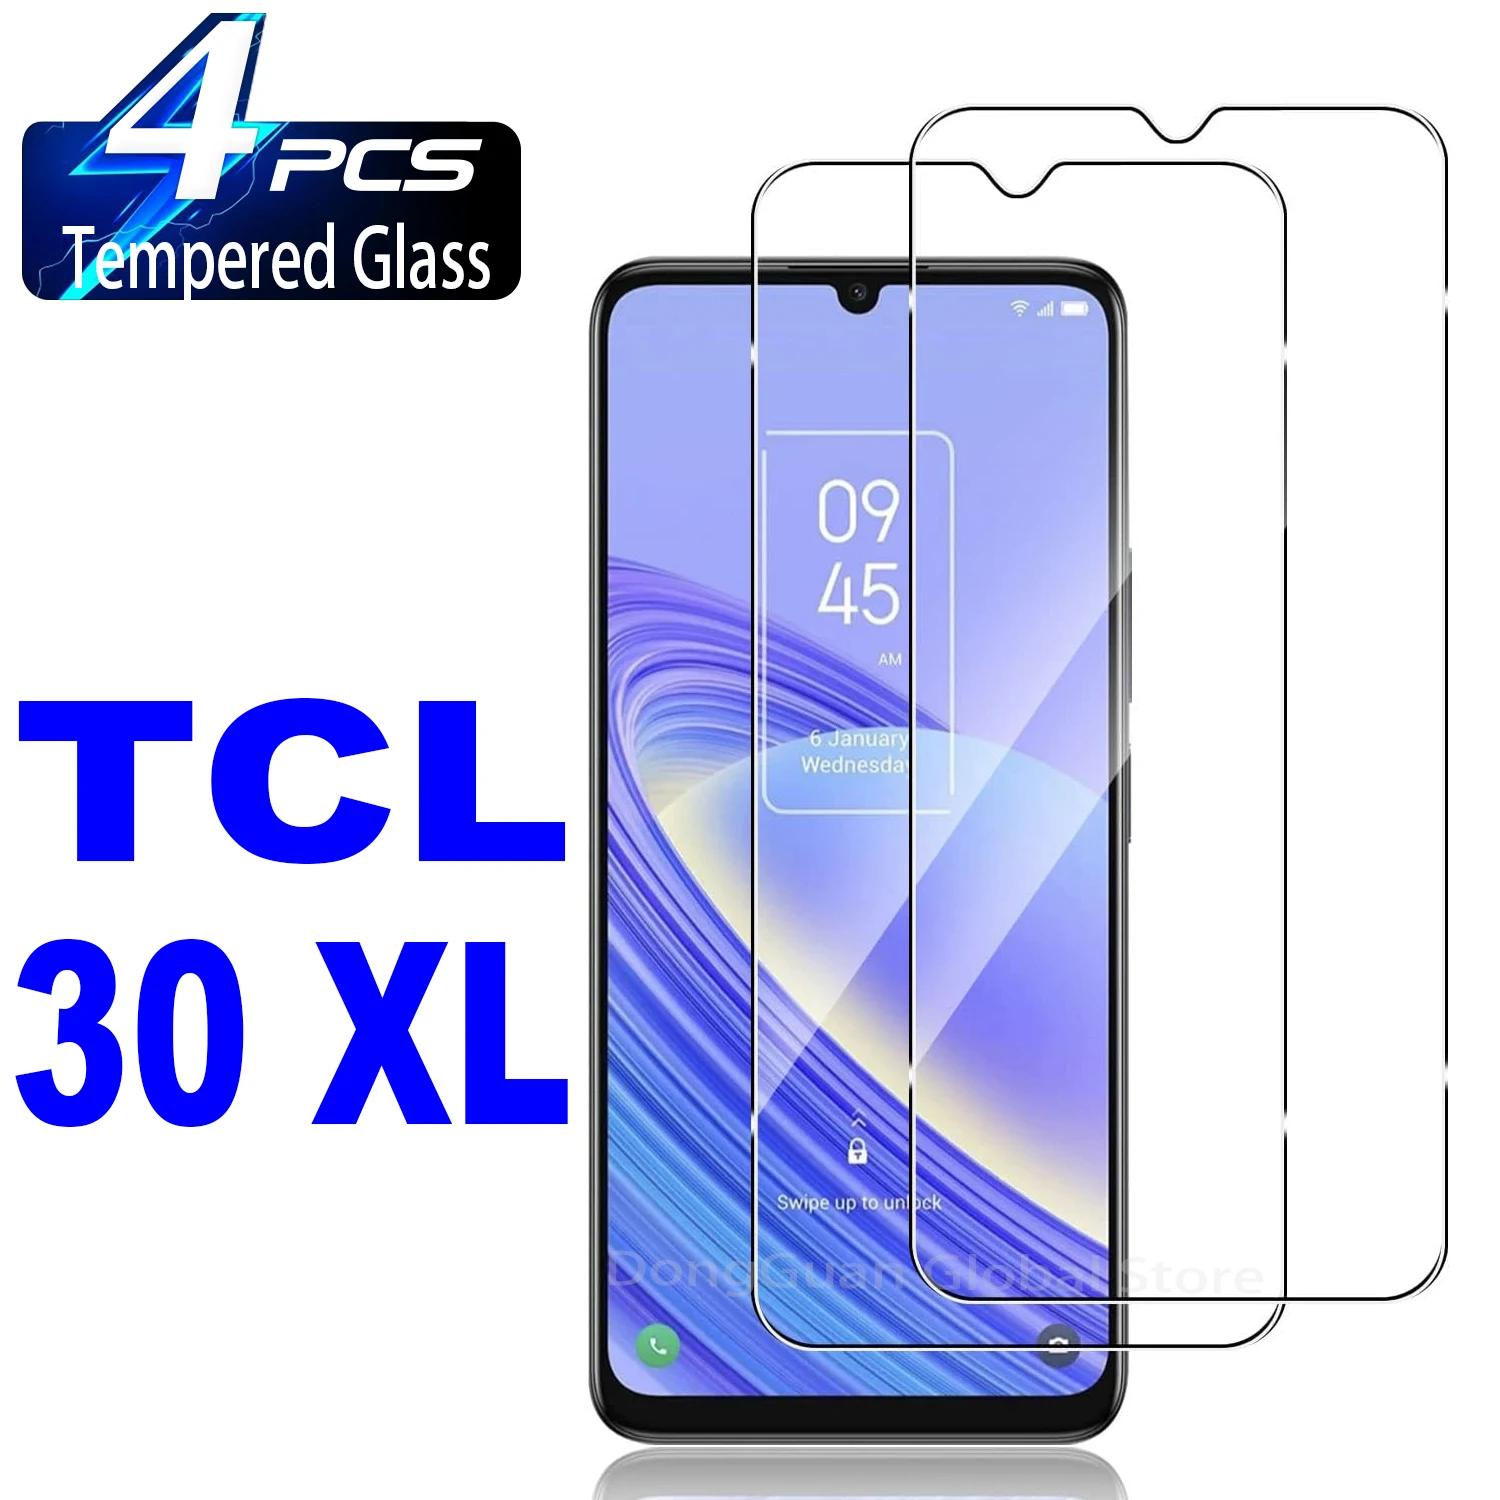 2/4Pcs Tempered Glass For TCL 30 XL Matte Anti Spy Screen Protector Privacy Glass Film 2 4pcs screen protector privacy glass for huawei honor 90 70 5g anti spy tempered glass